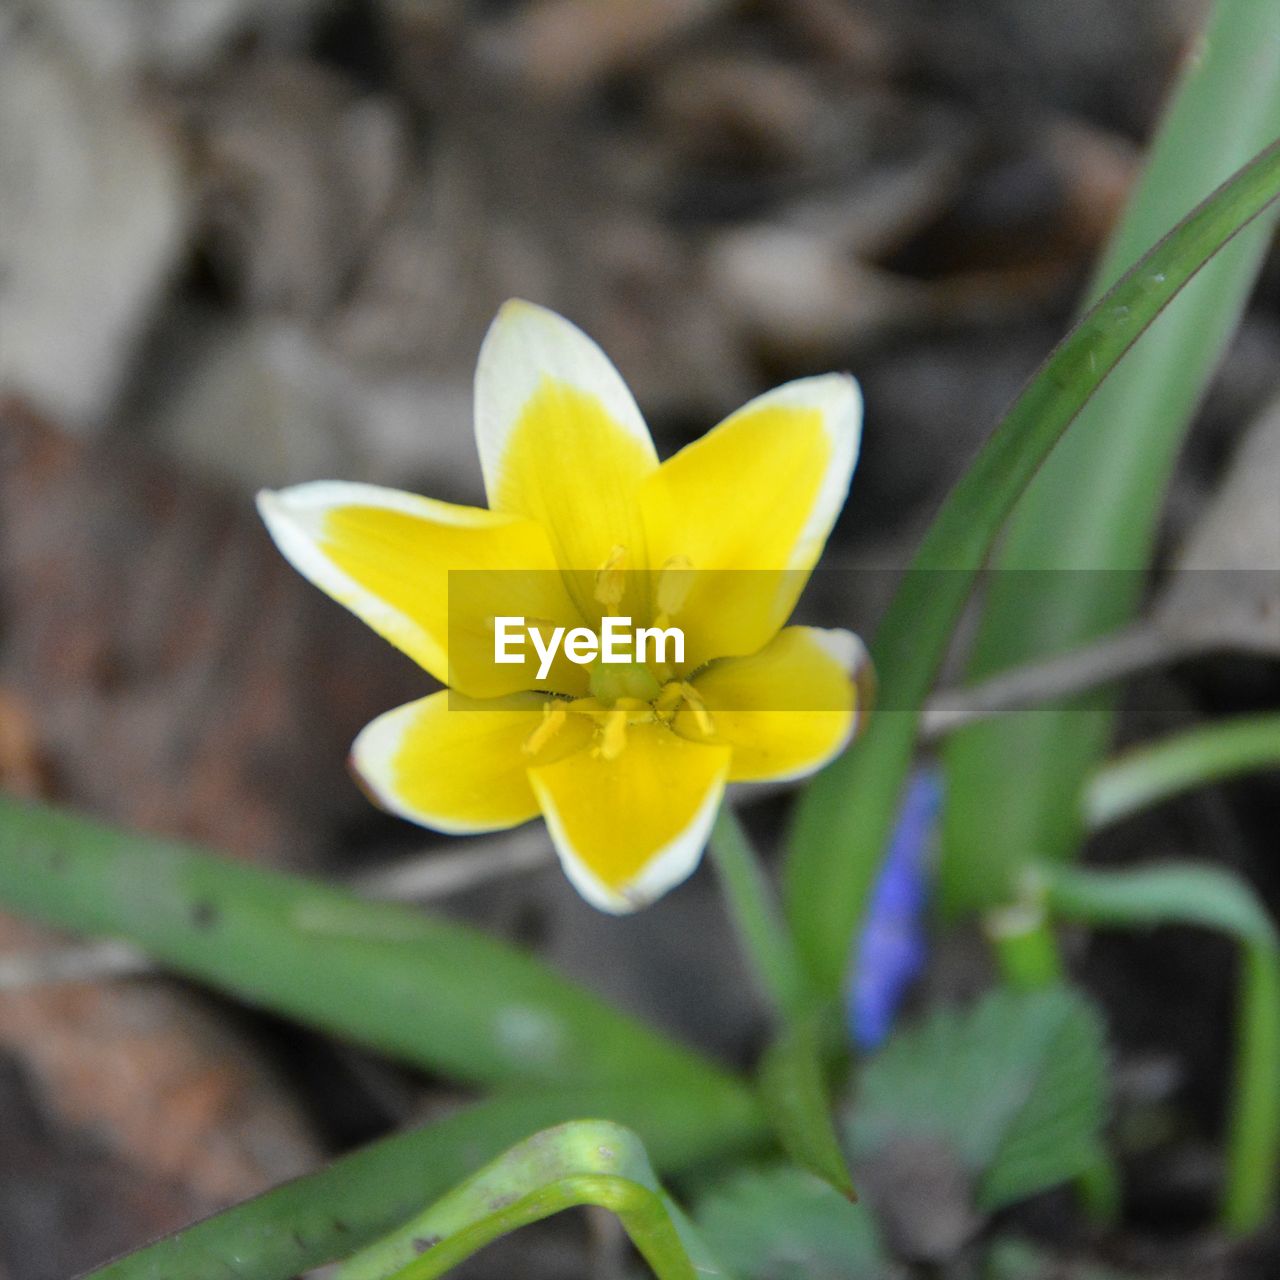 CLOSE-UP OF YELLOW FLOWER BLOOMING